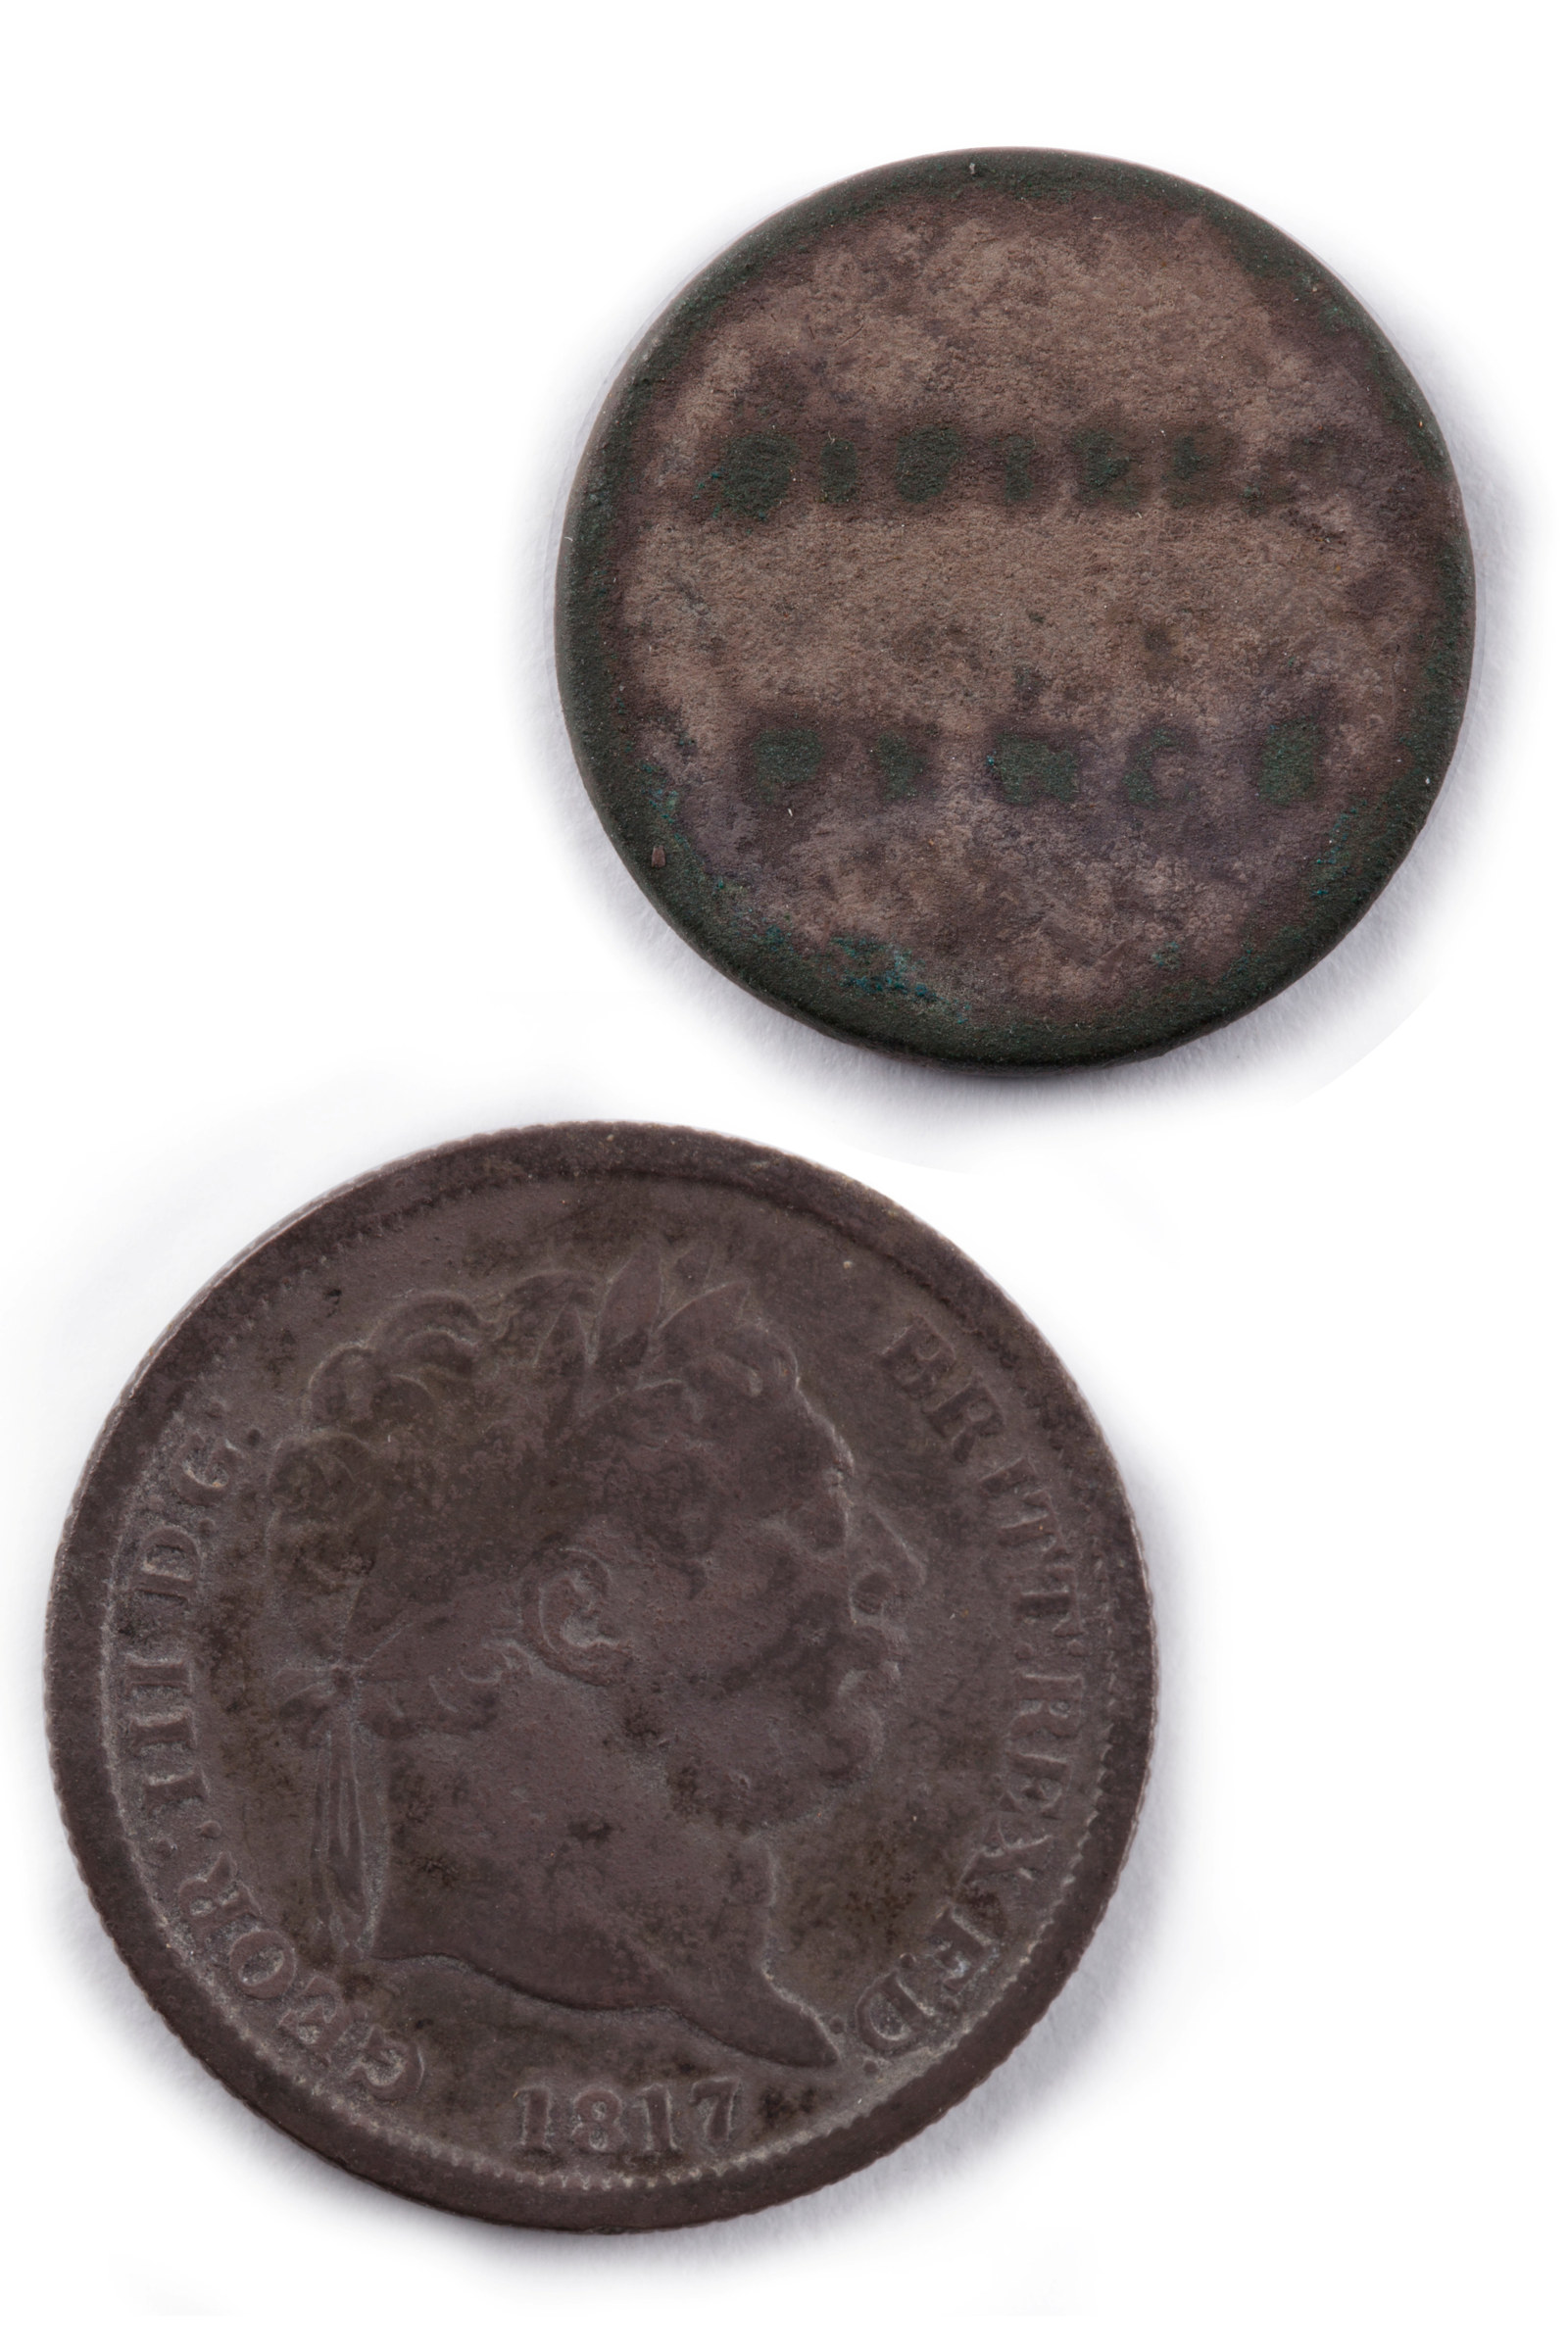 George III farthing, 1817, excavated from beneath the ground floor of Hyde Park Barracks